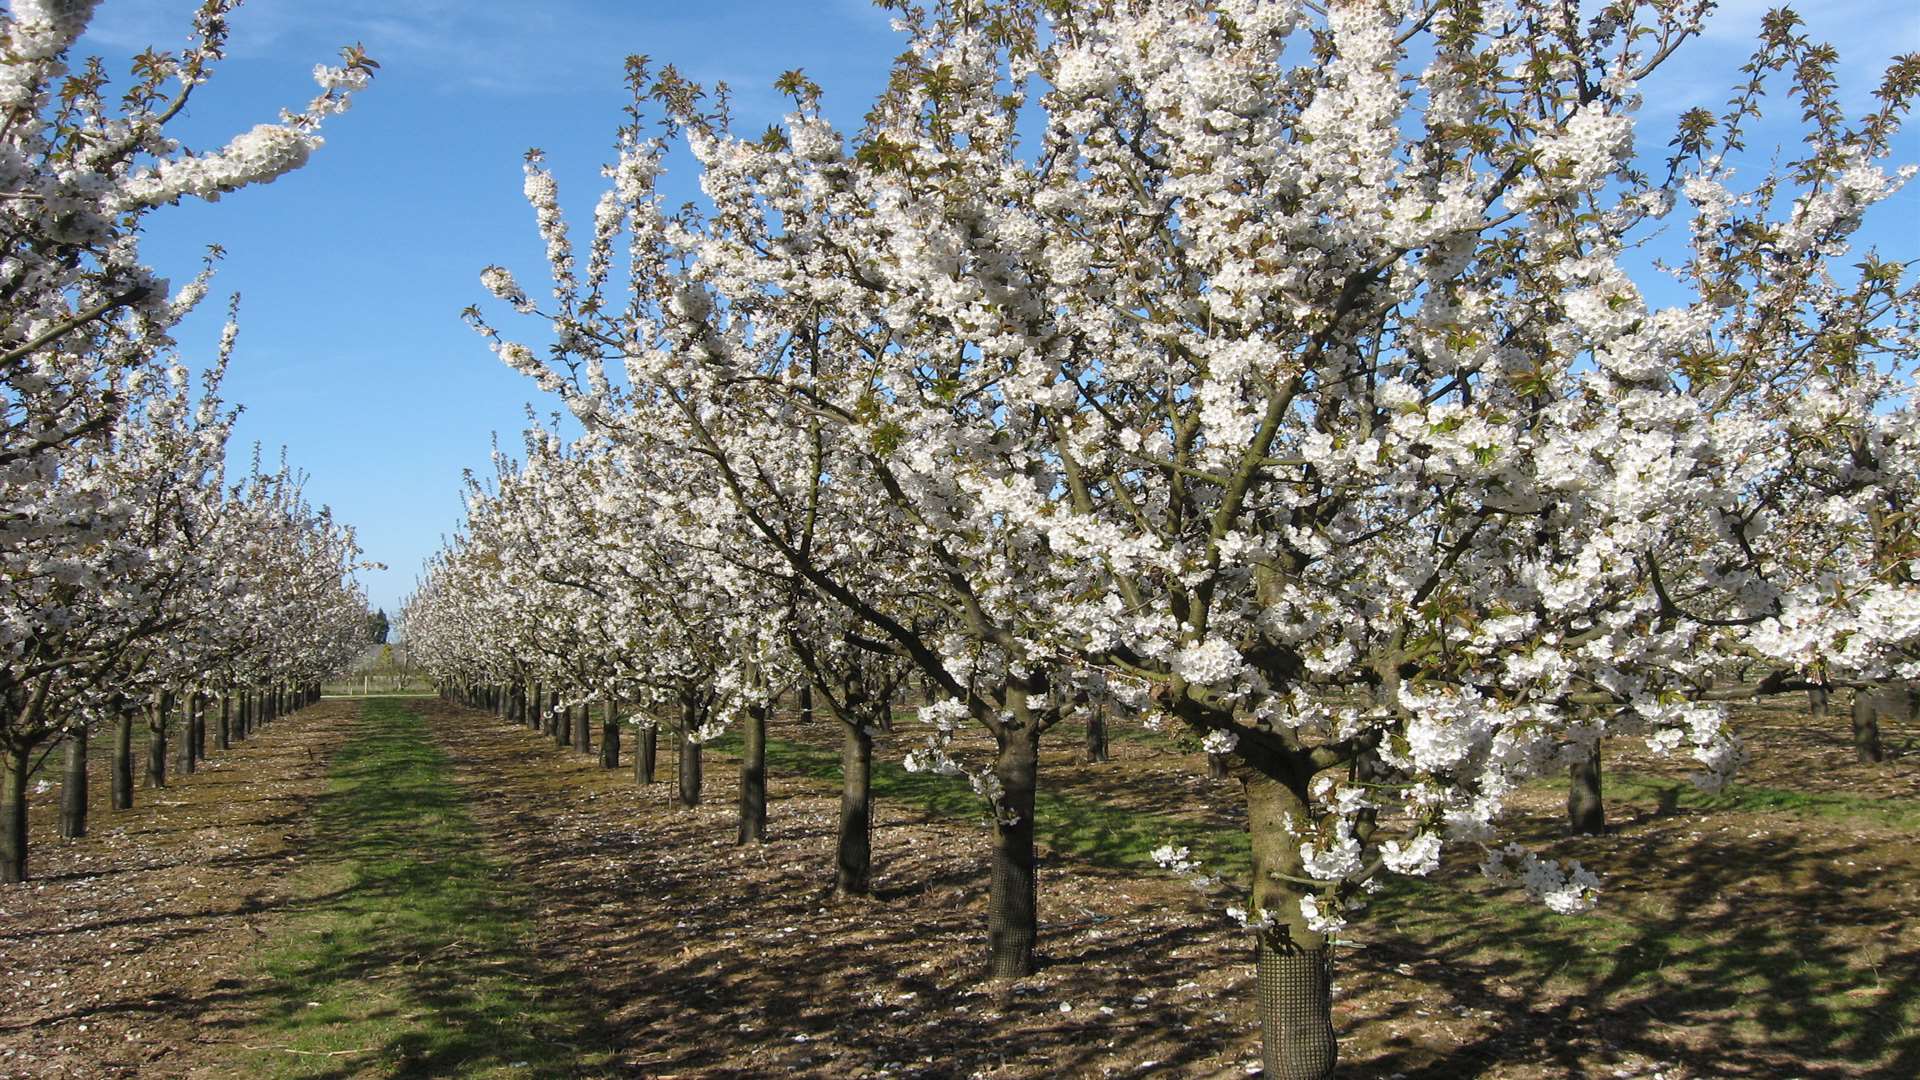 More than 4,000 varieties of fruit trees grow on the farm at Brogdale